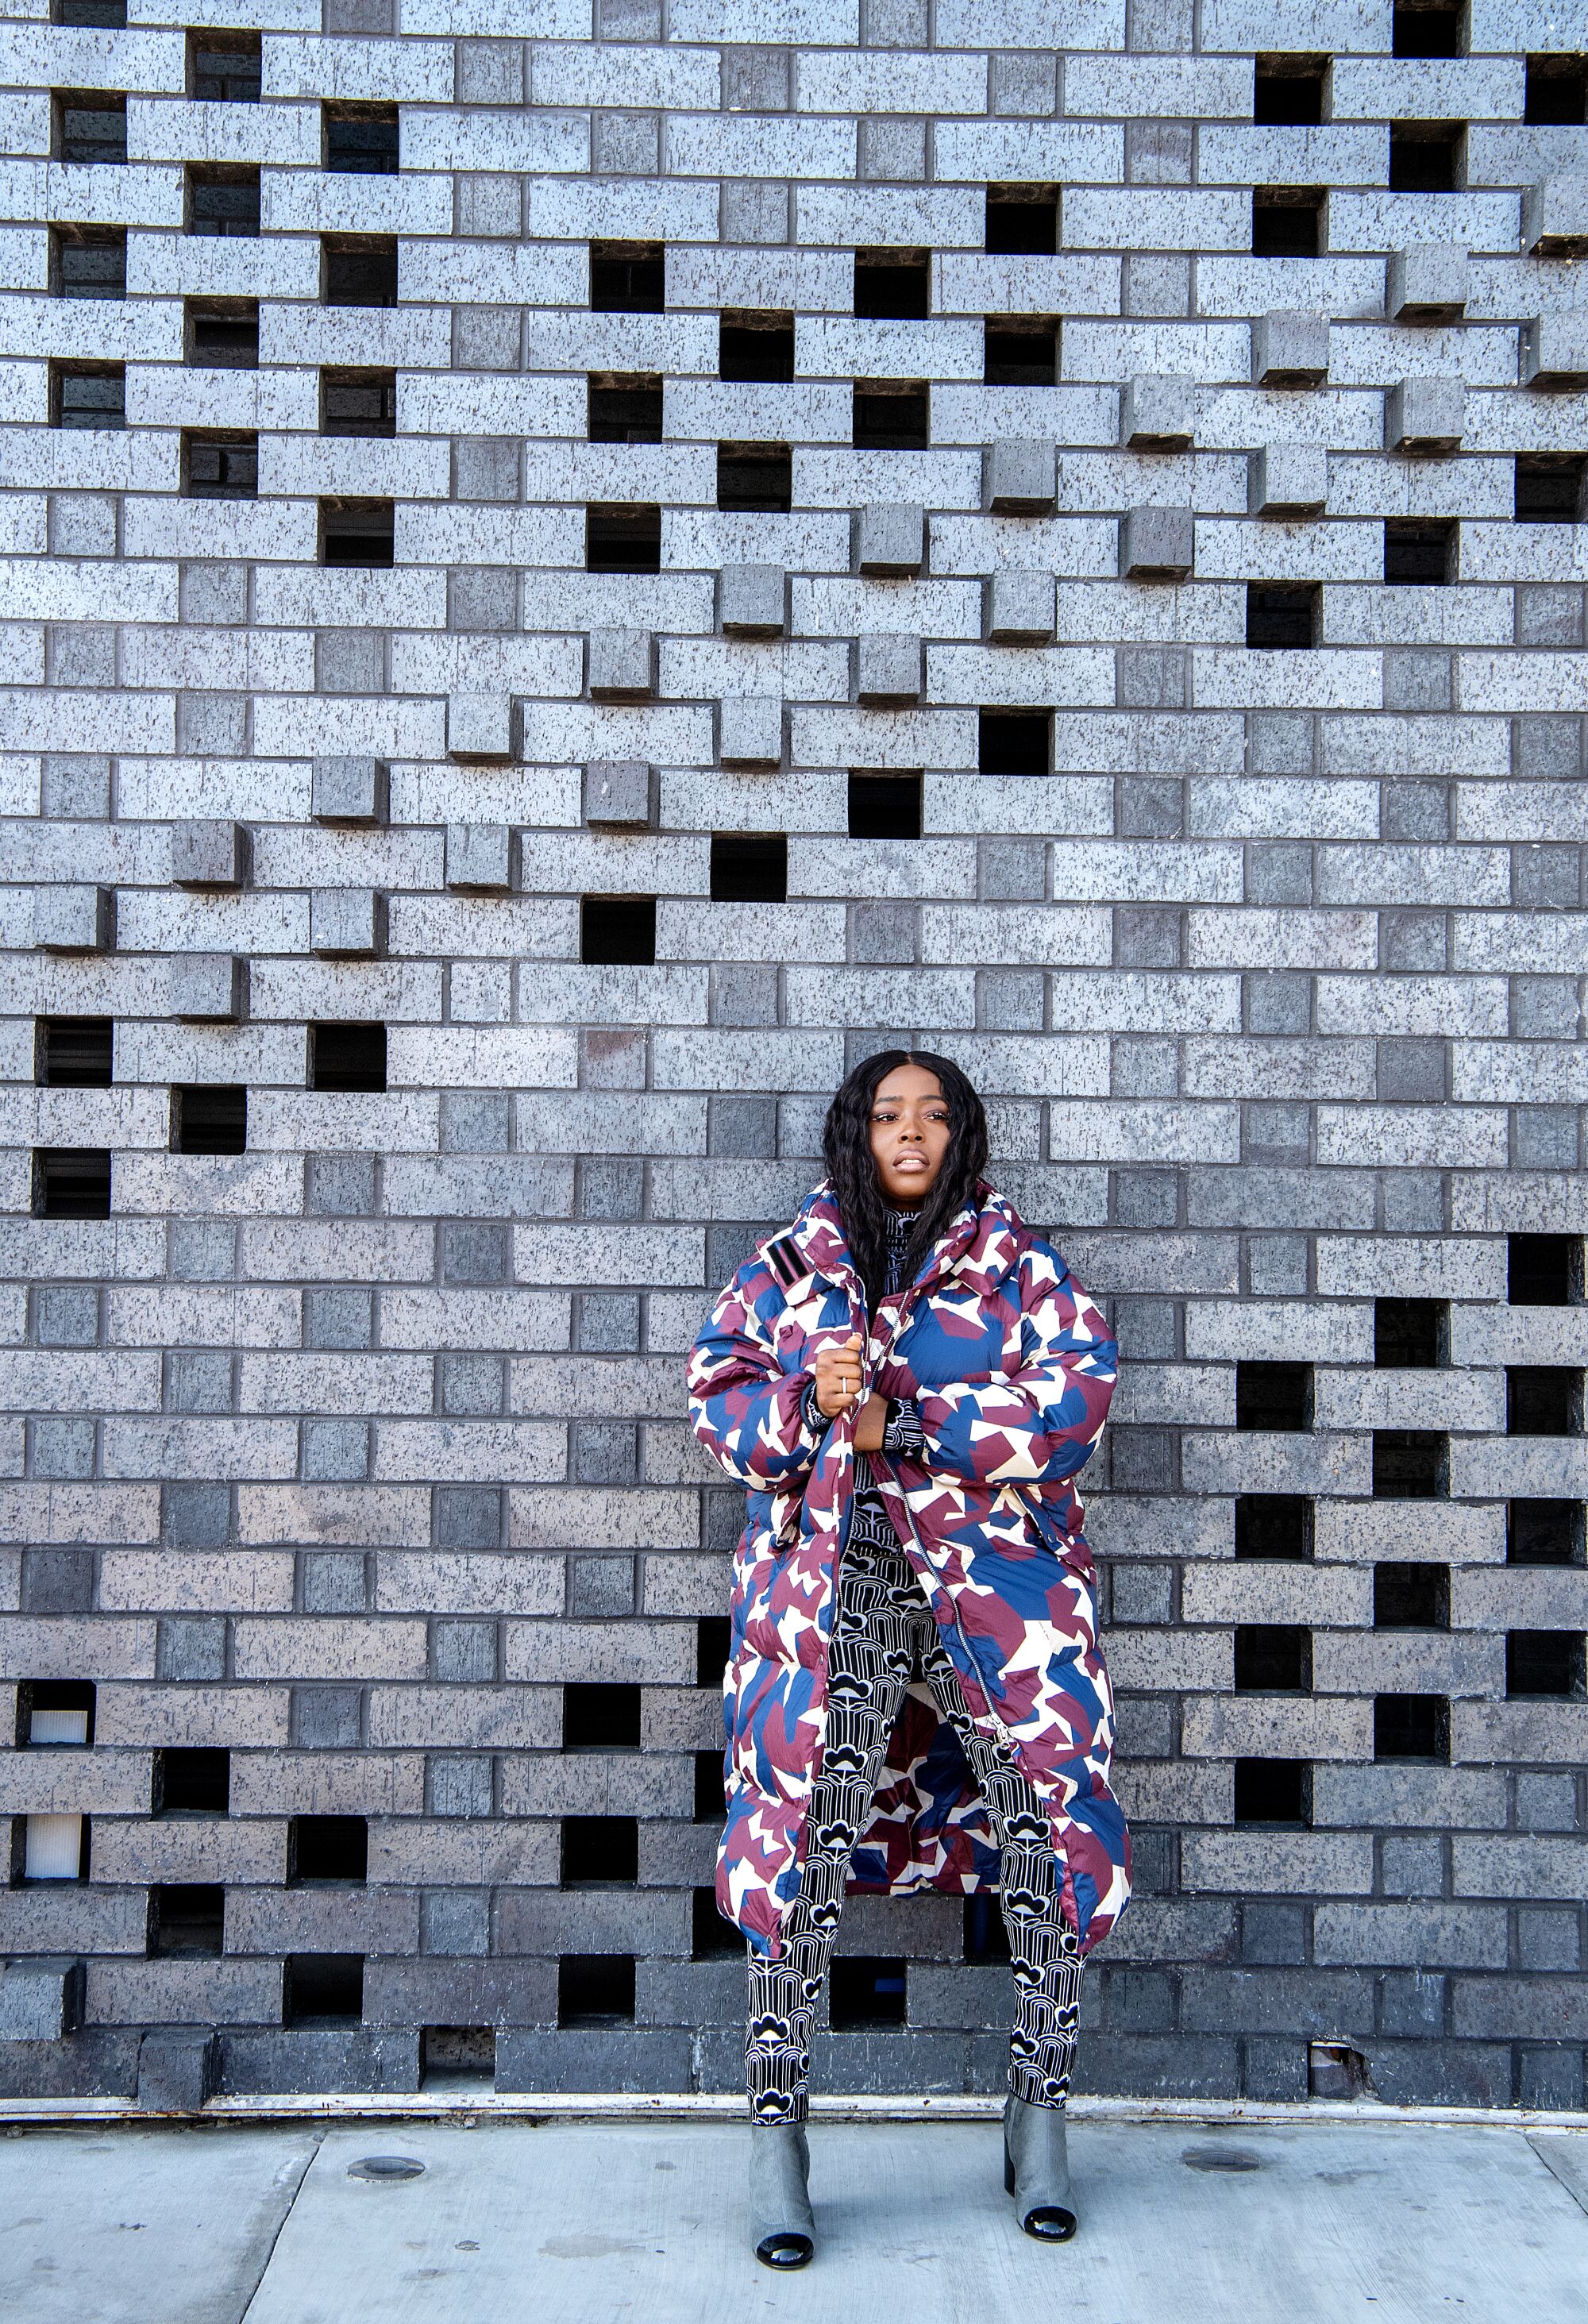 A woman in a colorful coat stands in front of a patterned wall.